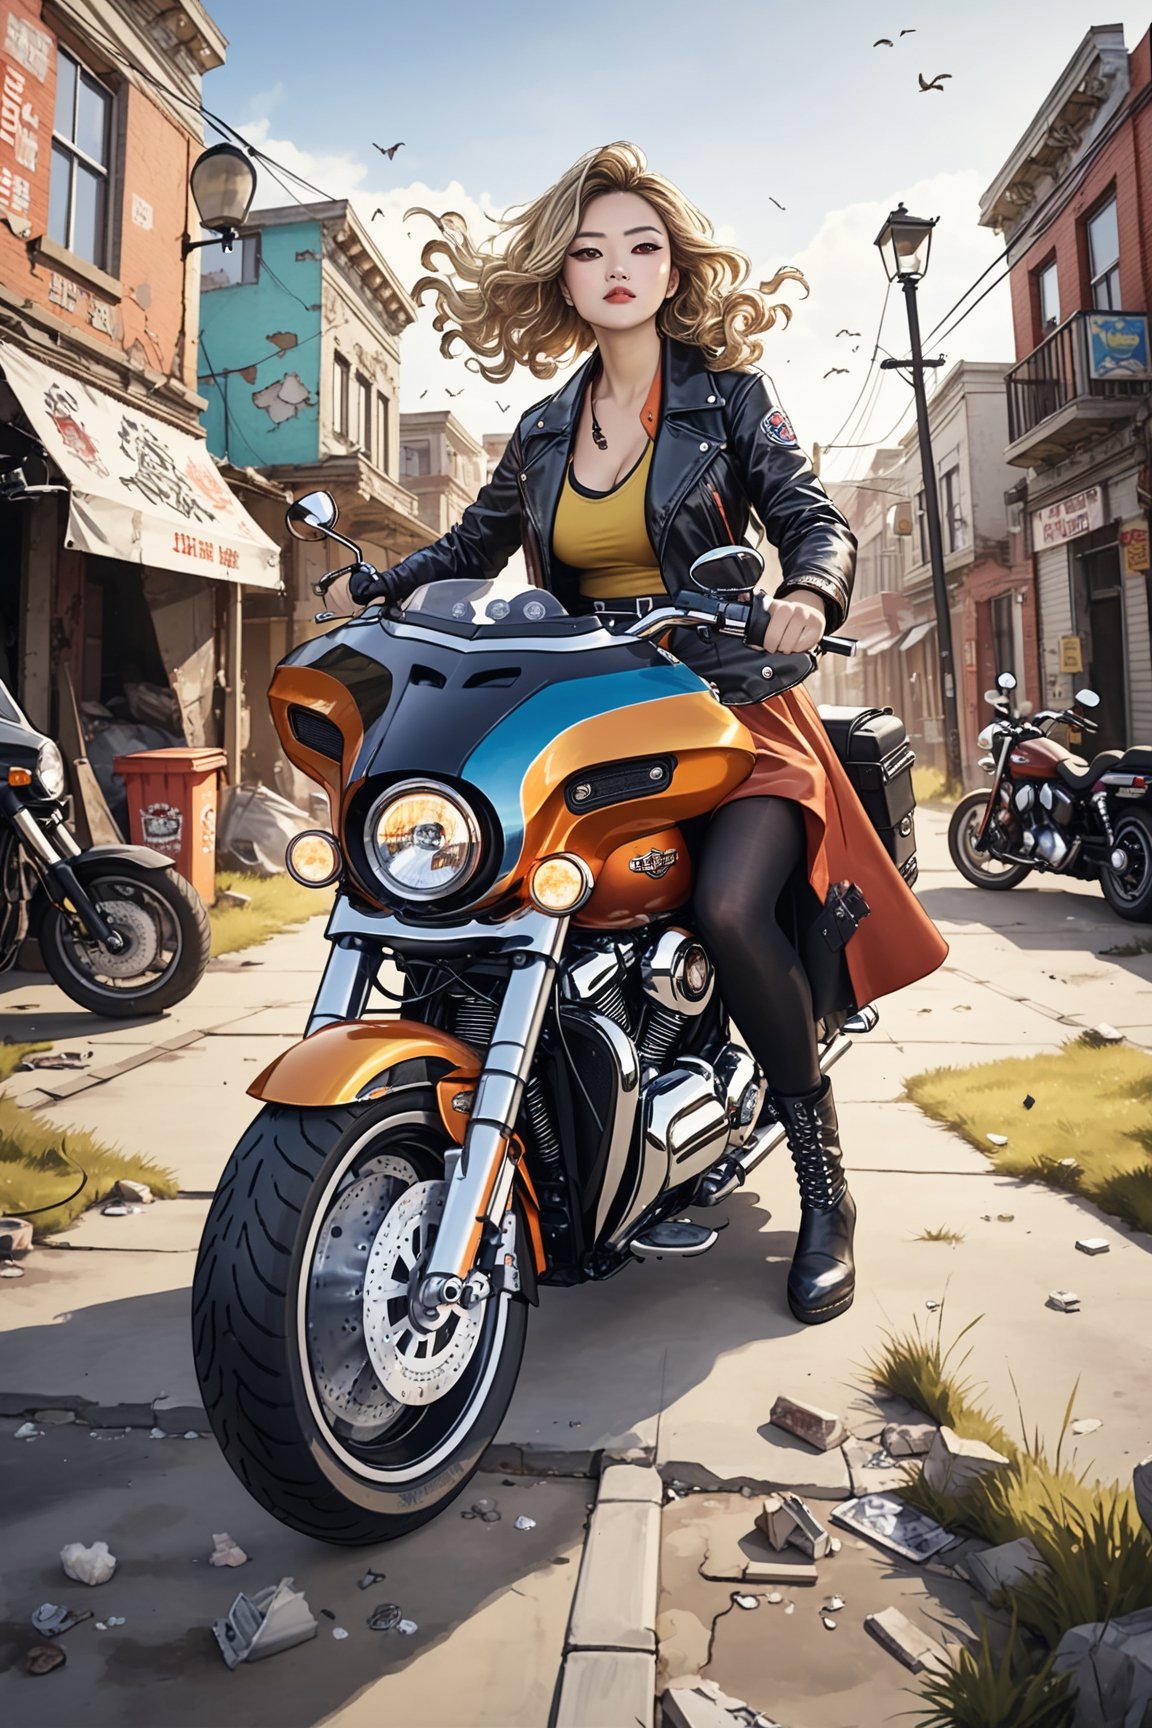 An artistic vision of a female adventurer surveying a small South Korean town. She is wearing a colorful outfit with a closely fitted jacket, warm skirt, black tights, and ankle boots with medium heels. She is driving a Harley-Davidson CVO Limited motorcycle. Fierce and confident expression, suggestive poses exuding seductive charm. Blonde hair styled into ringlets that framed the face. An abandoned town street, deserted, destroyed lamppost, rusty trashcan, grass, scattered parts of clothes, vibrant colors. Highly detailed. Cluttered maximalism. Close-up shot. Super wide angle, 